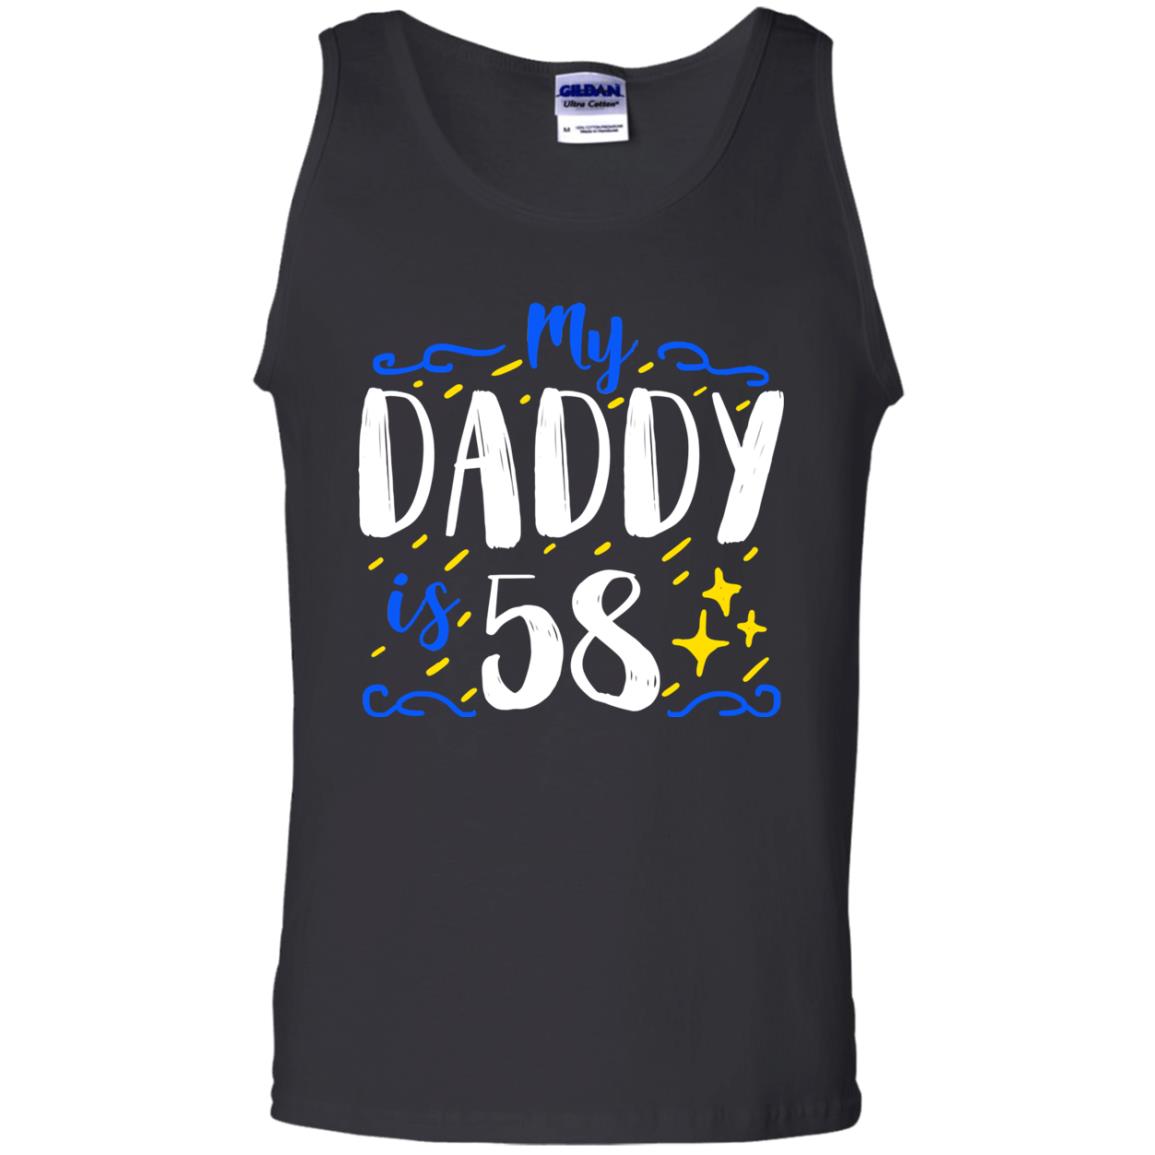 My Daddy Is 58 58th Birthday Daddy Shirt For Sons Or DaughtersG220 Gildan 100% Cotton Tank Top